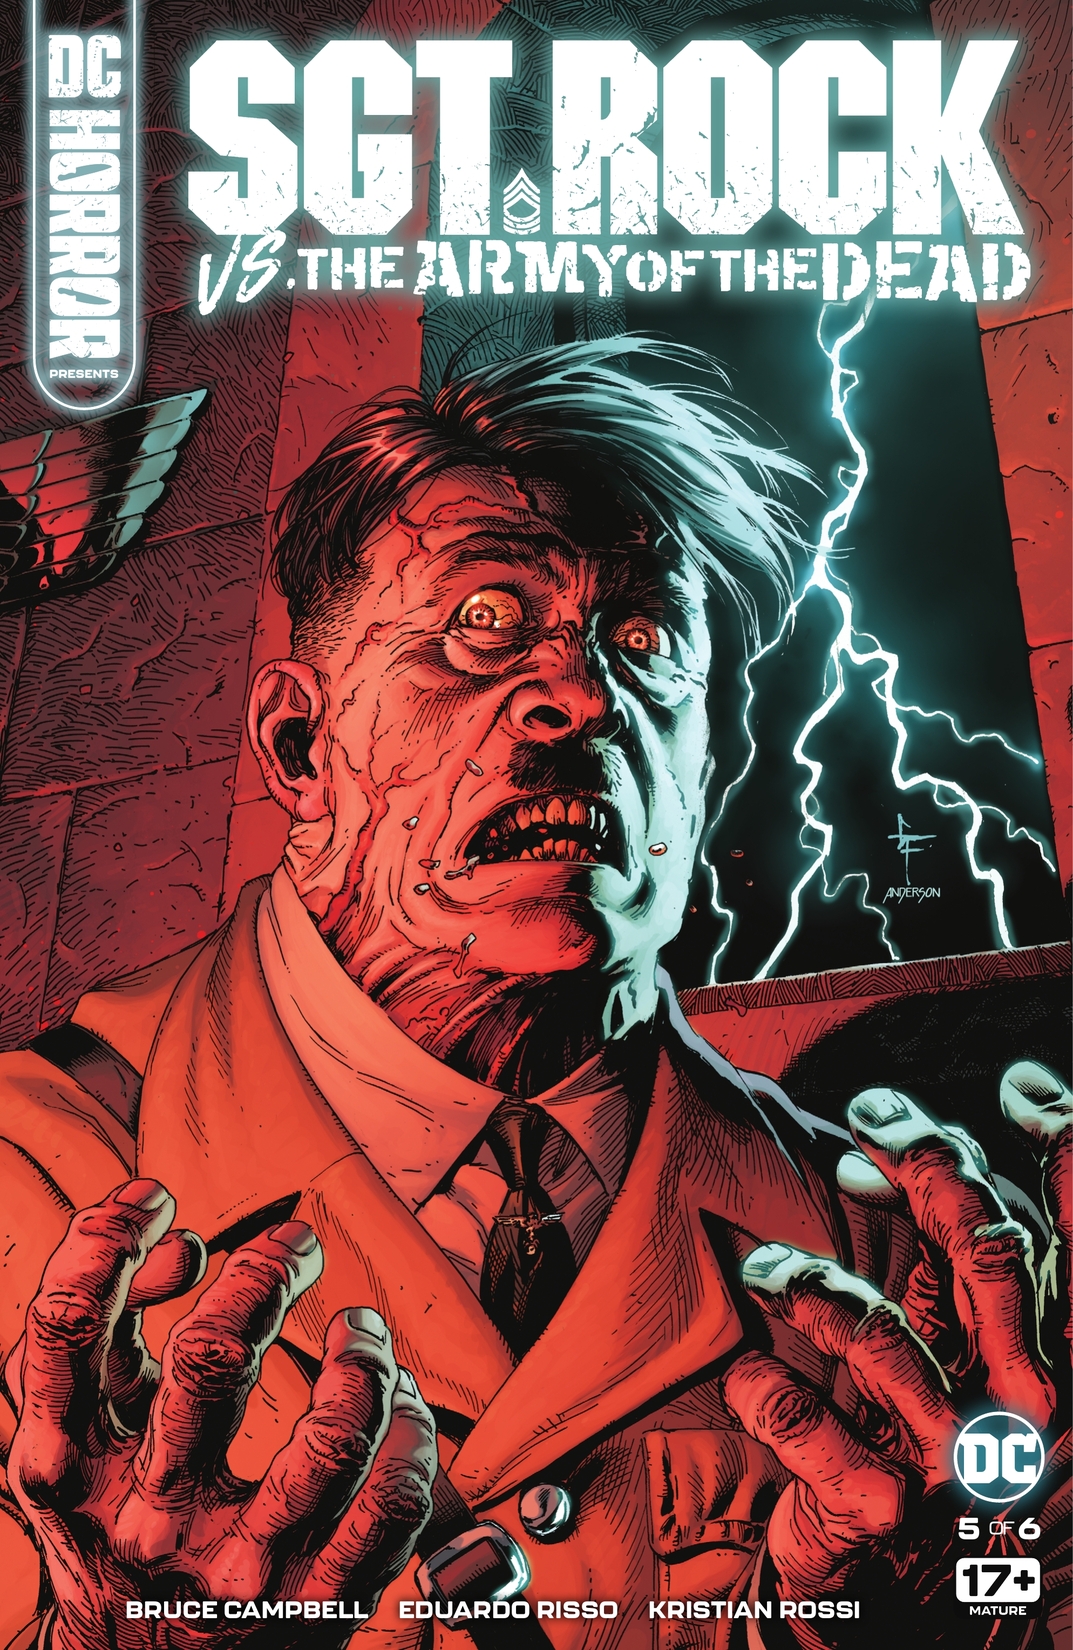 DC Horror Presents: Sgt. Rock vs. The Army of the Dead #5 preview images